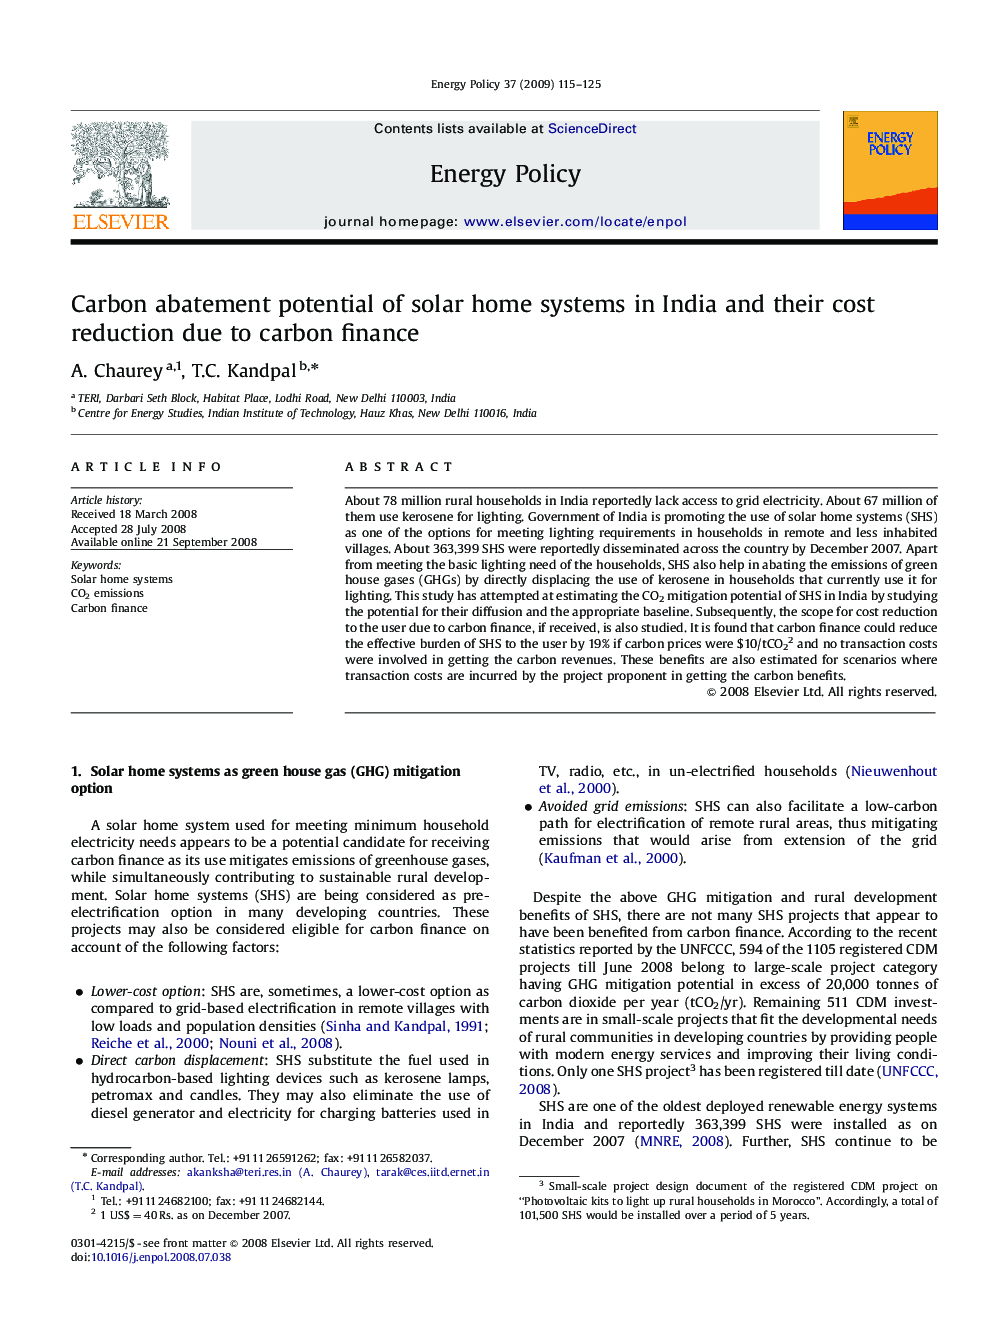 Carbon abatement potential of solar home systems in India and their cost reduction due to carbon finance